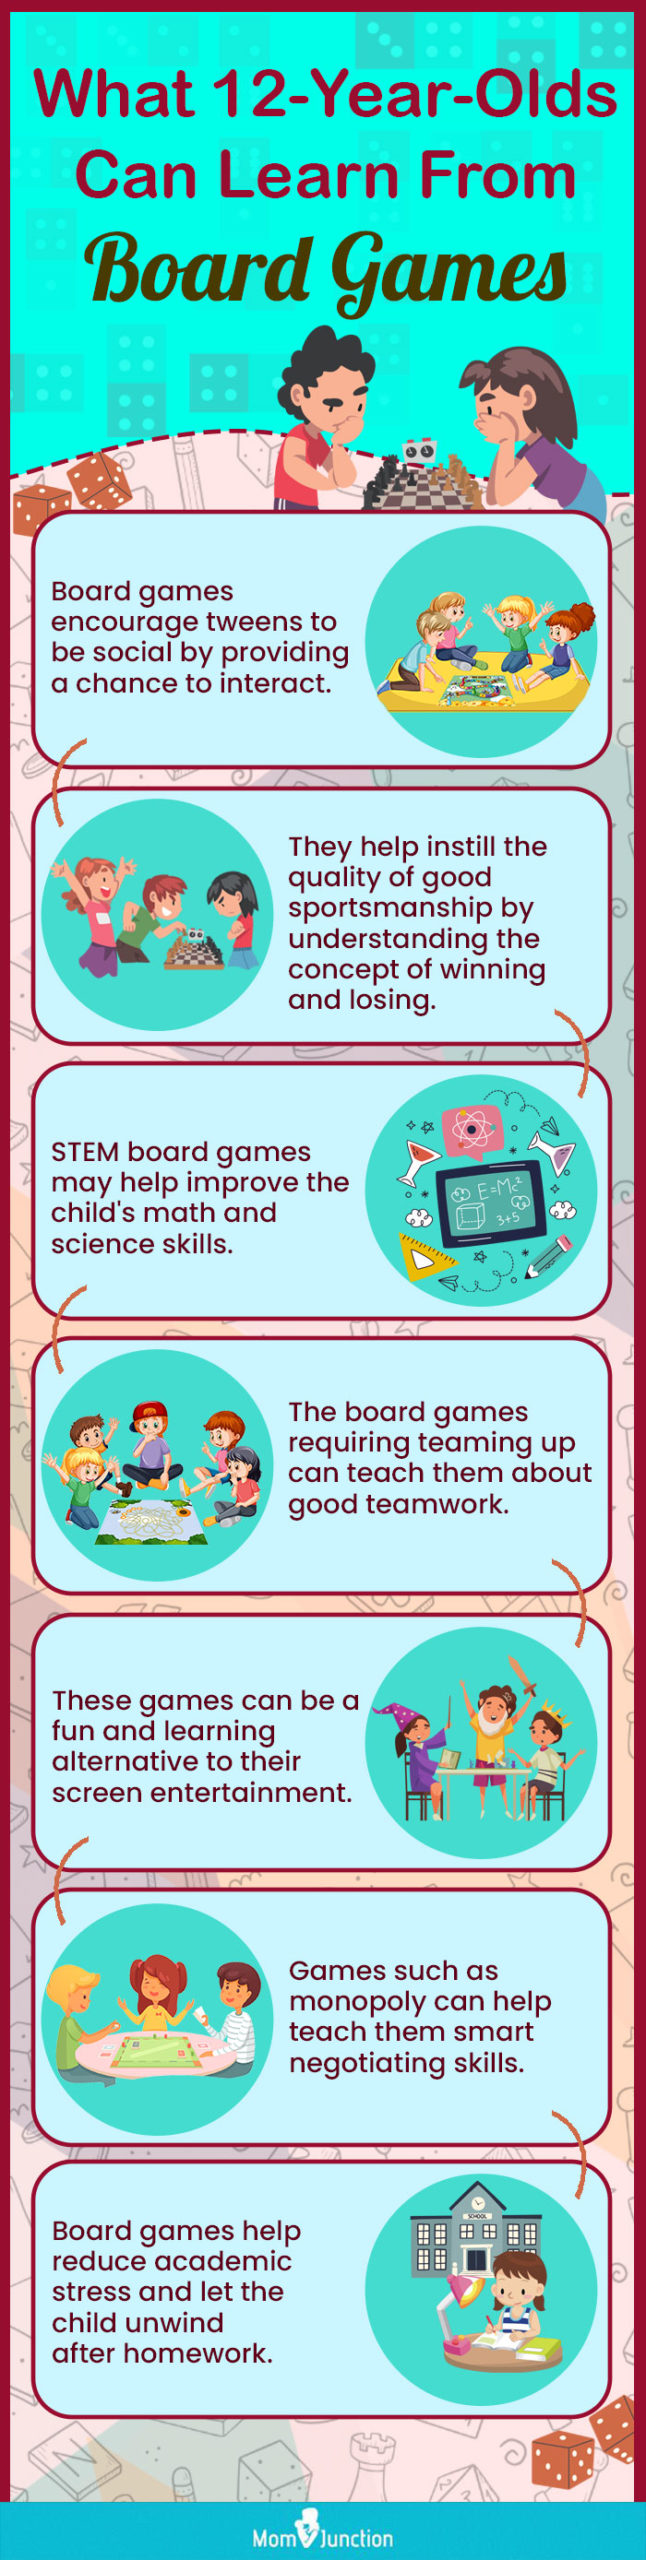 What-12-Year-Olds-Can-Learn-From-Board-Games (infographic)